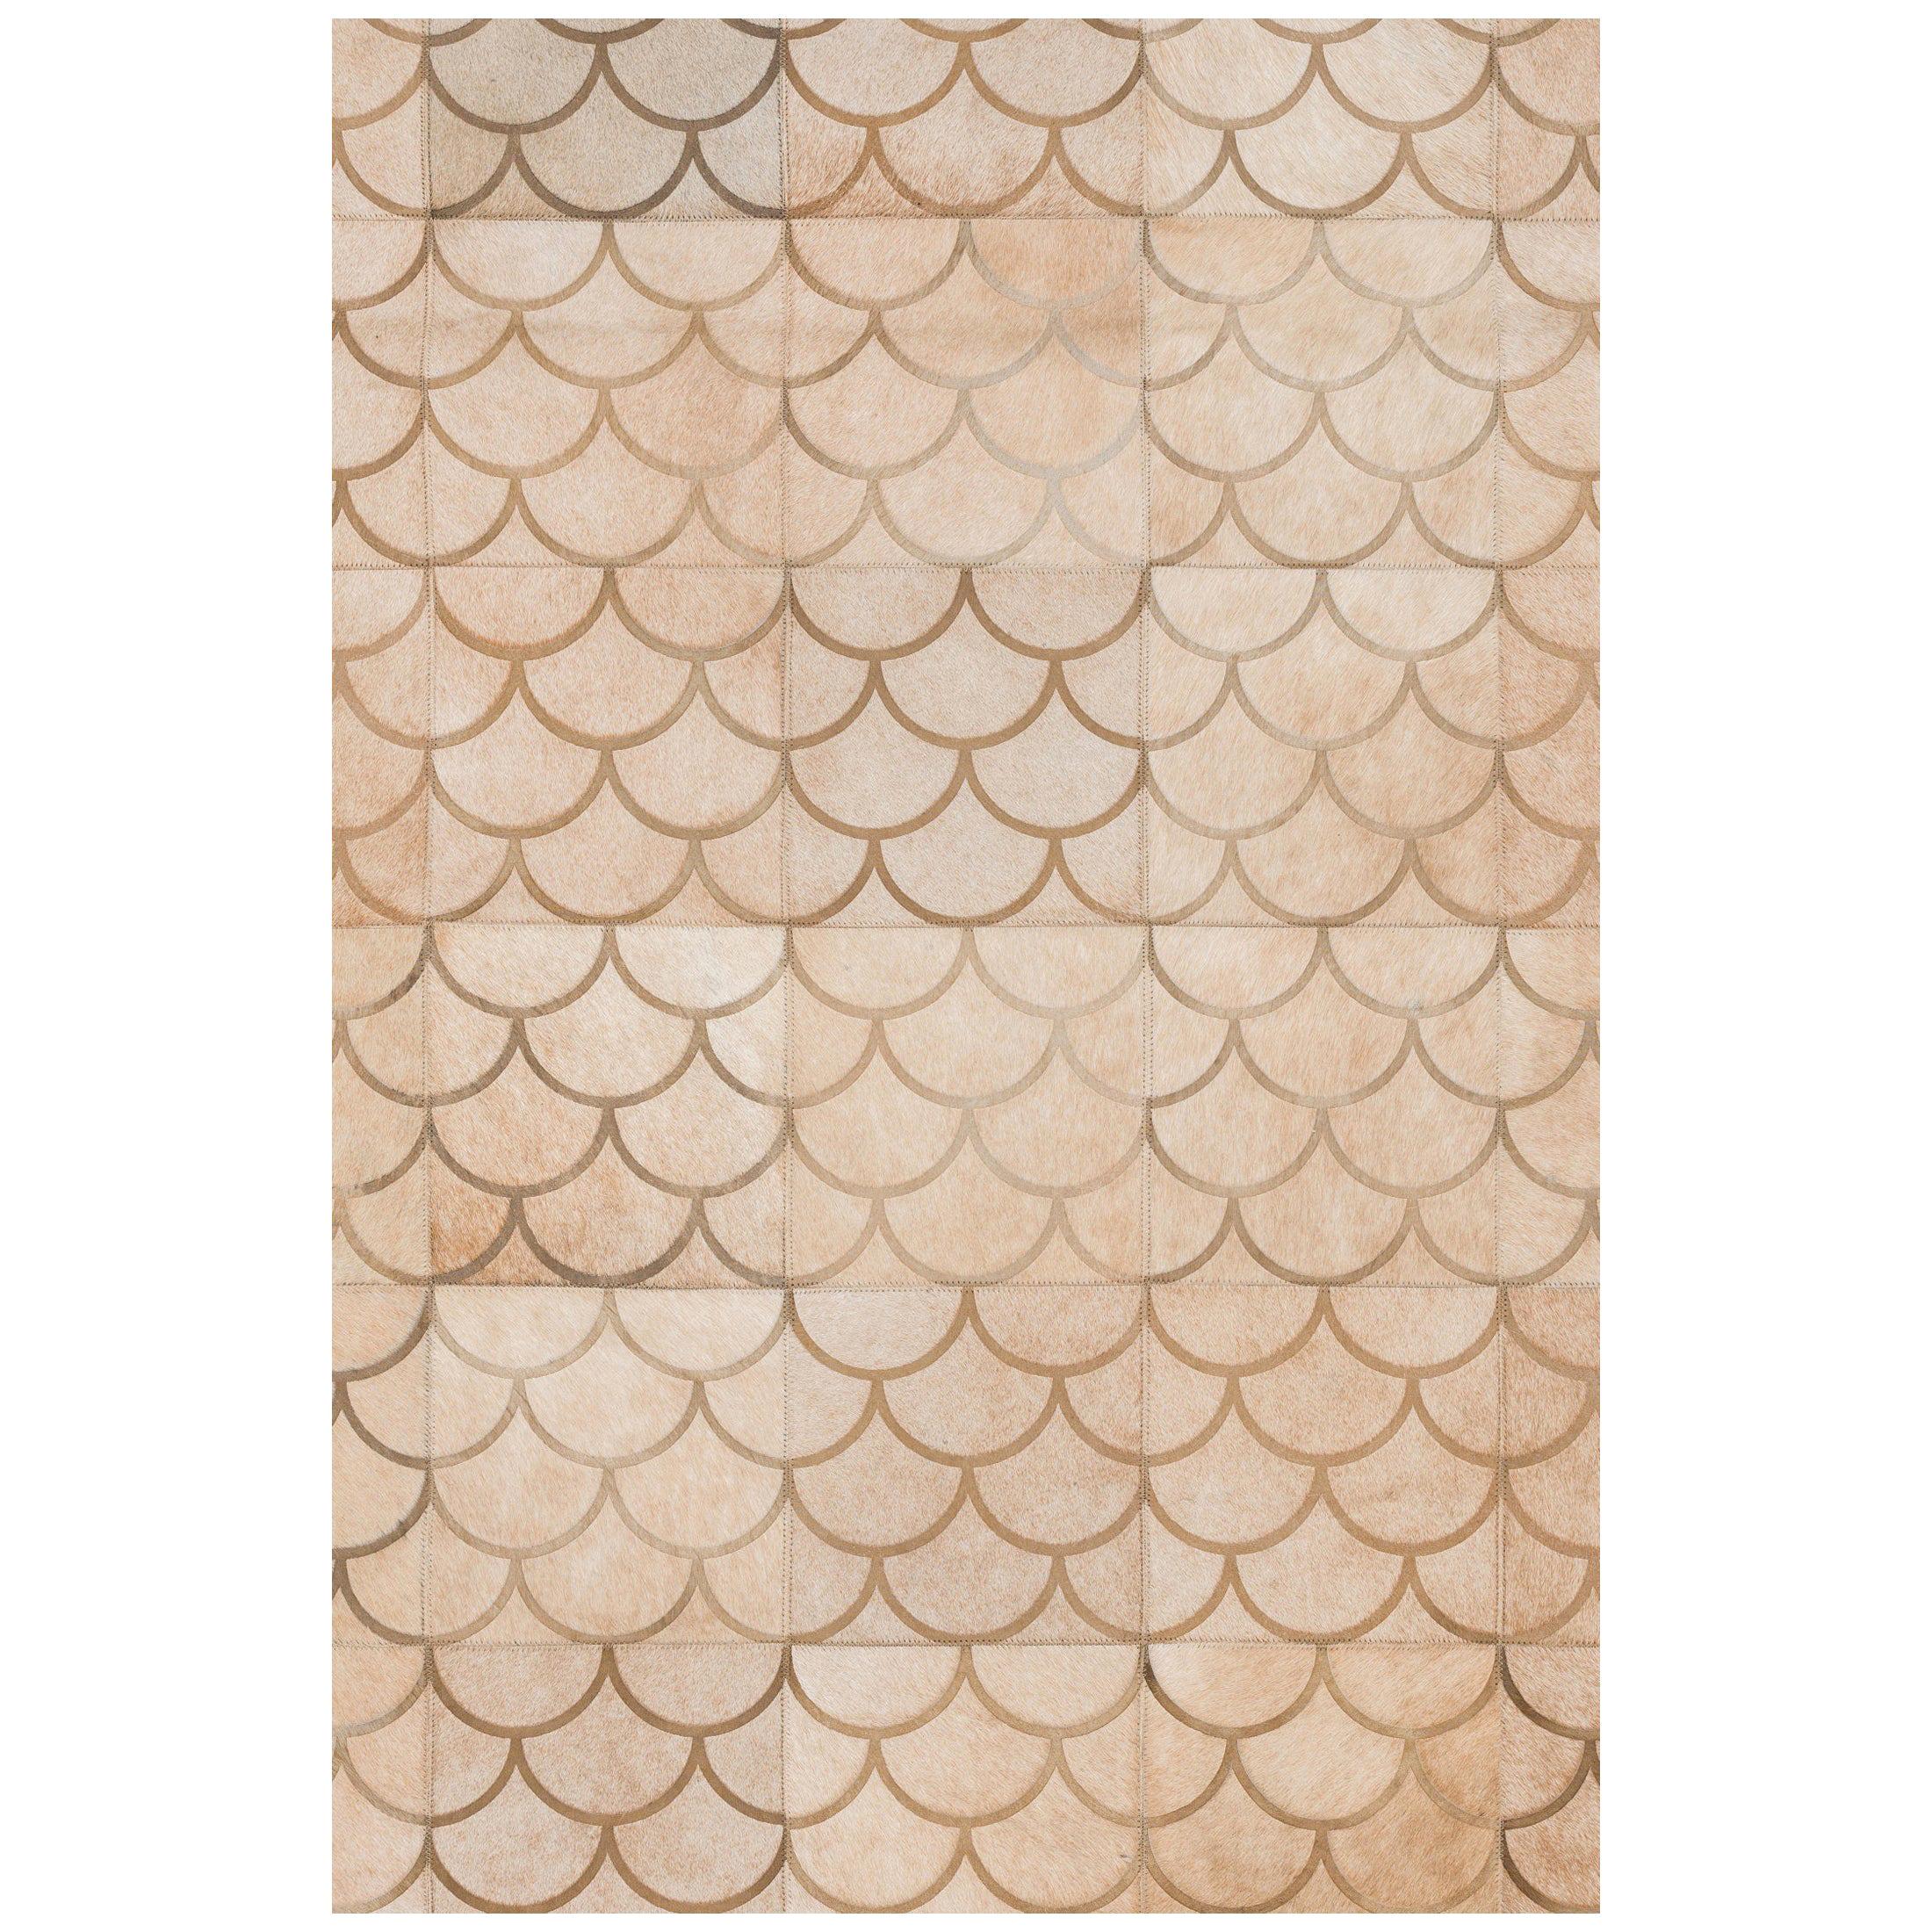 Modern Scallop Crescent Customizable Luneta Cowhide Area Floor Rug X-Large For Sale